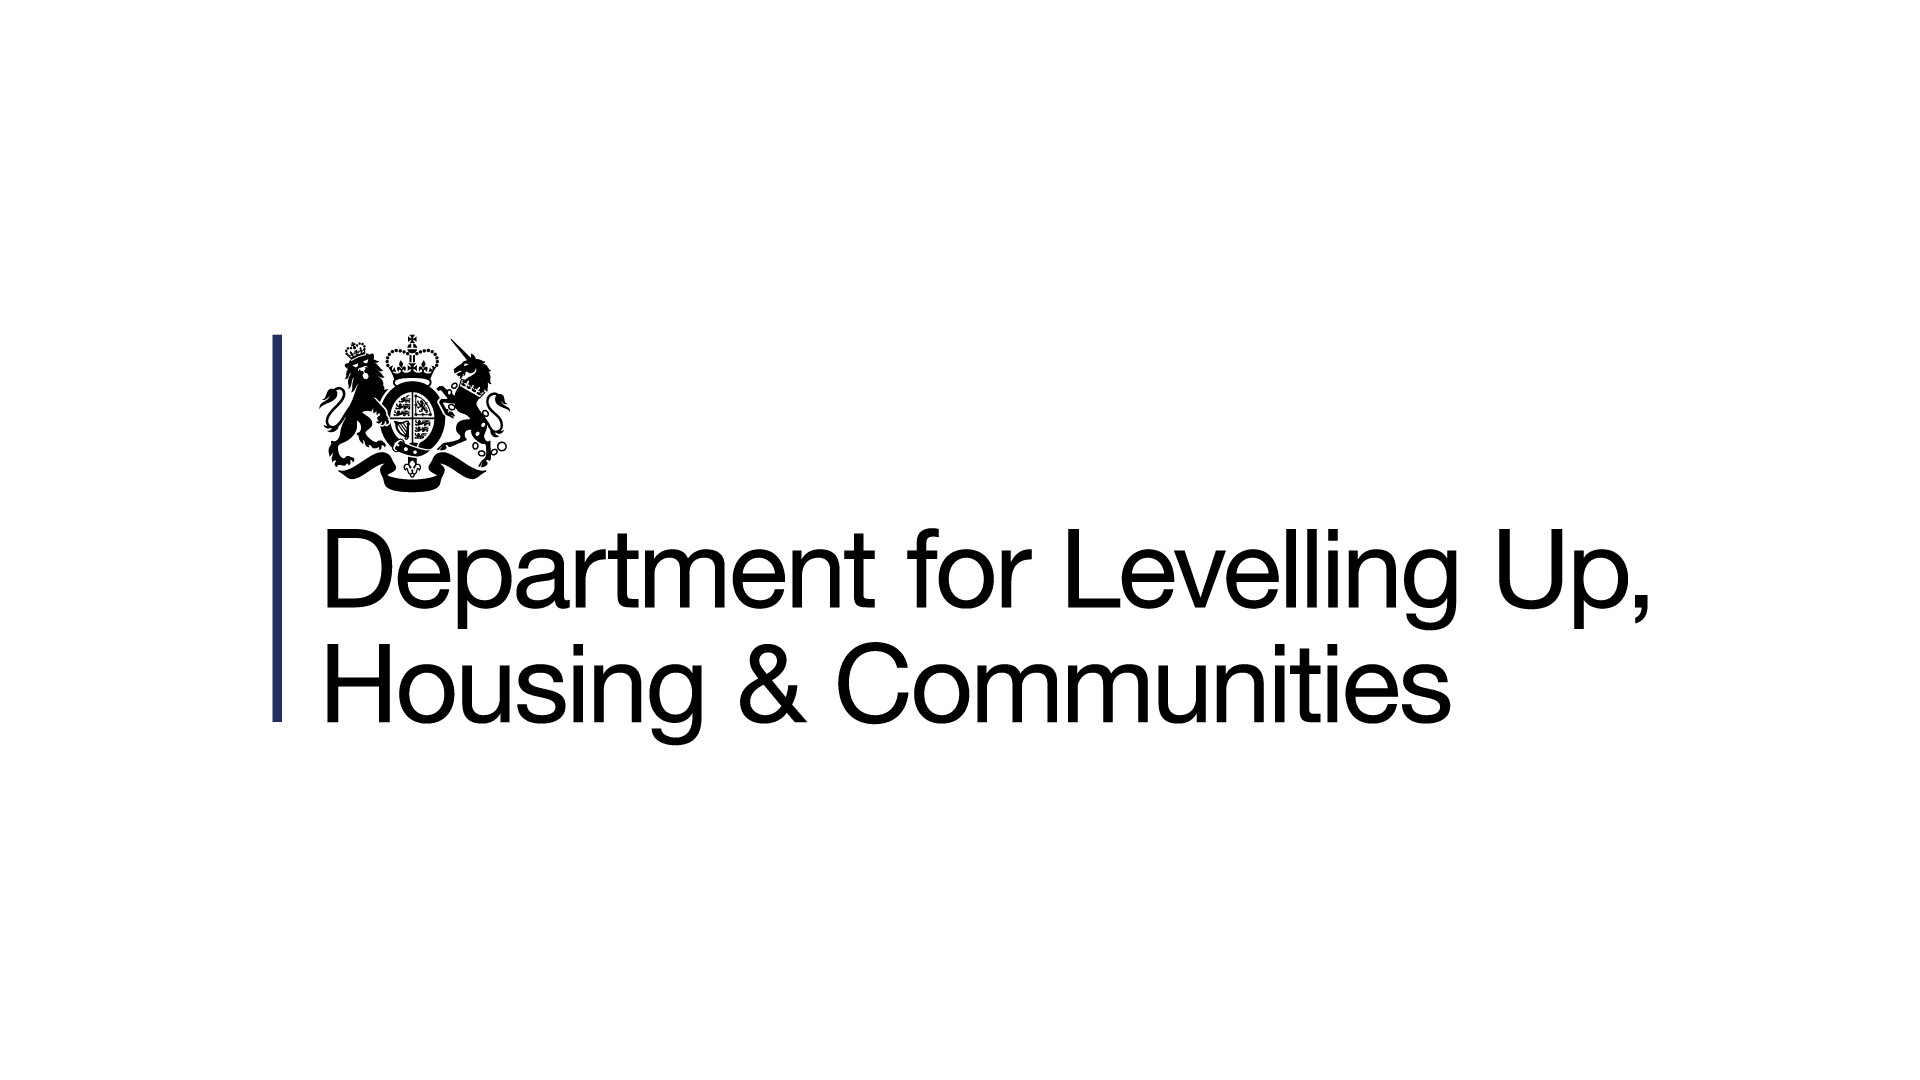 CADS Housing Surveys works for Department for Levelling Up, Housing & Communities